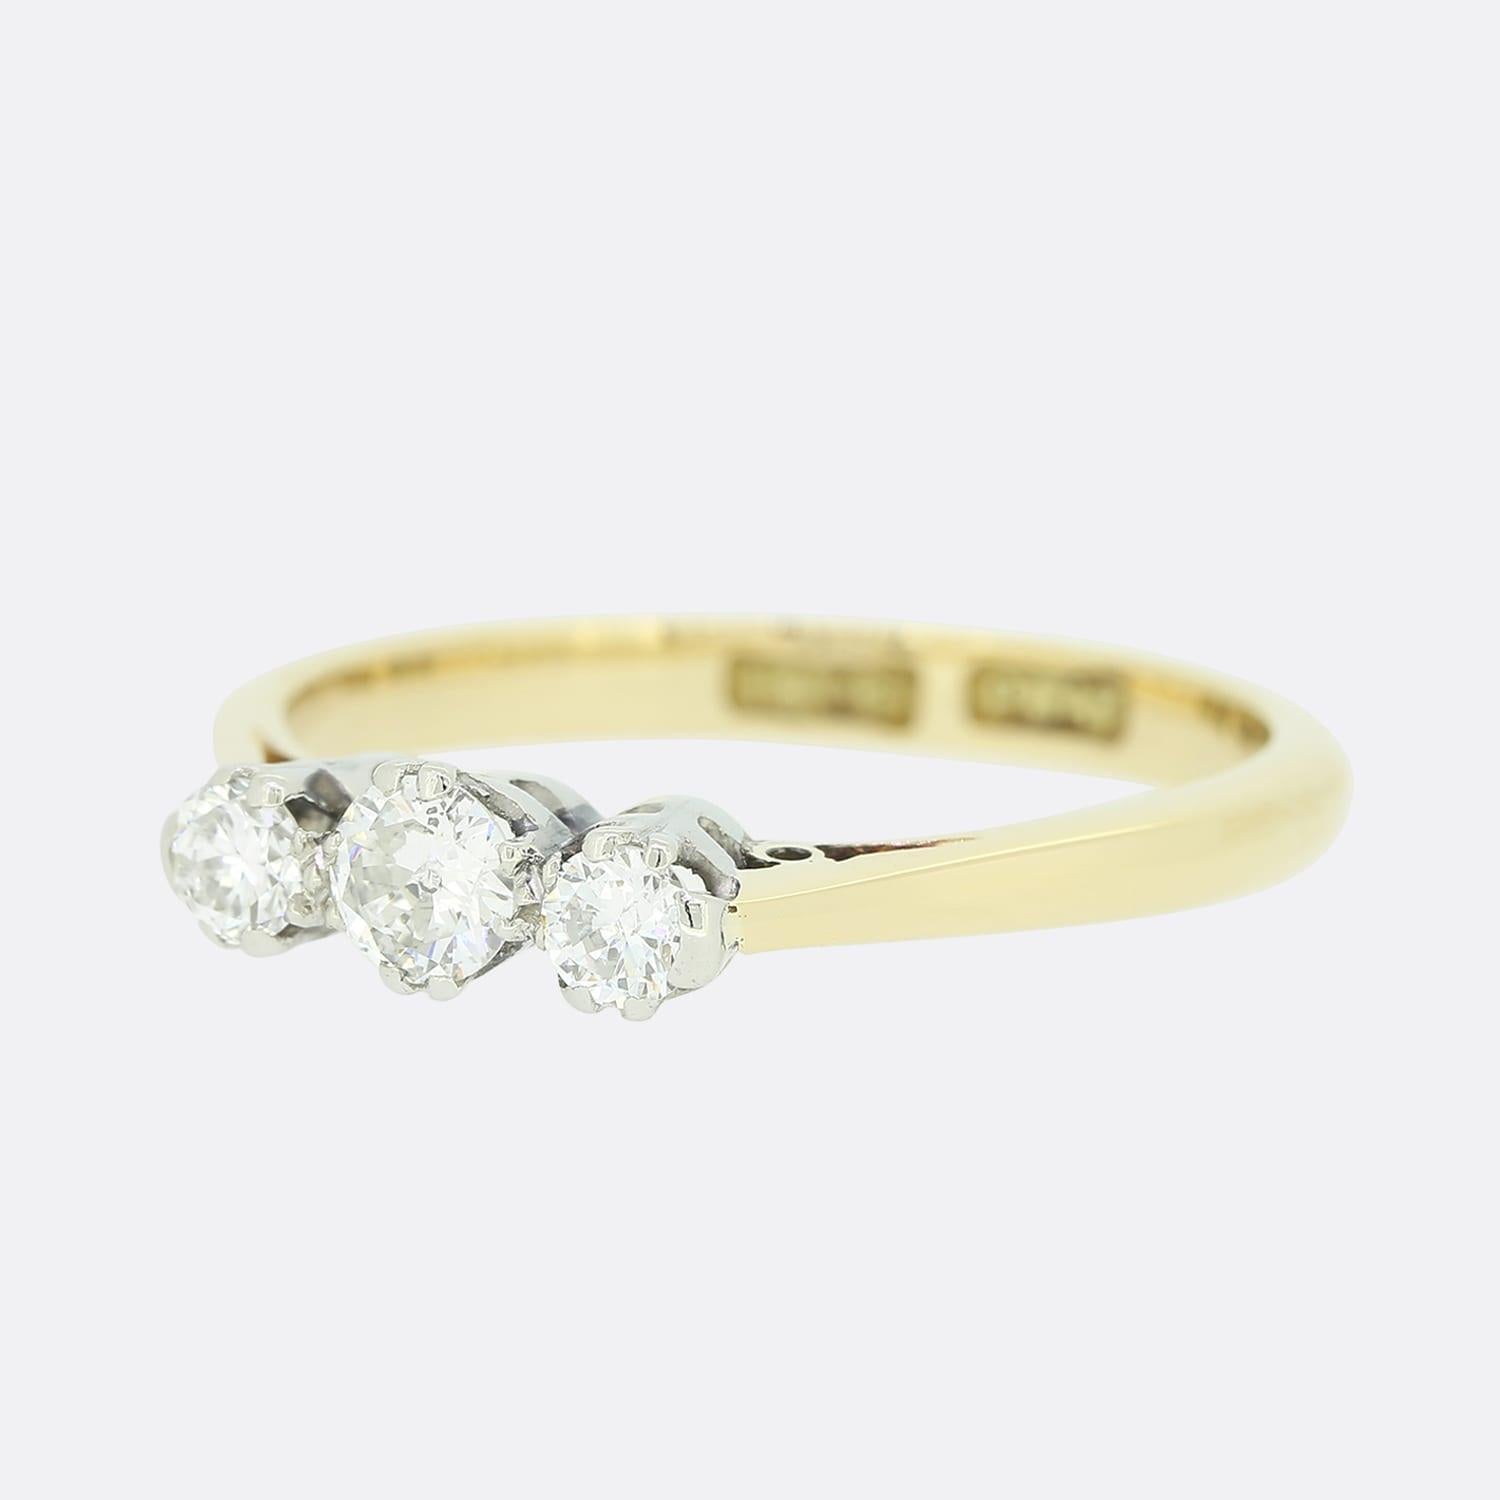 This is a vintage 18ct yellow gold diamond three-stone ring. All of the diamonds are round brilliant cuts and sit in platinum clawed mounts. The central diamond is slightly larger than the diamonds on either side.

Condition: Used (Very